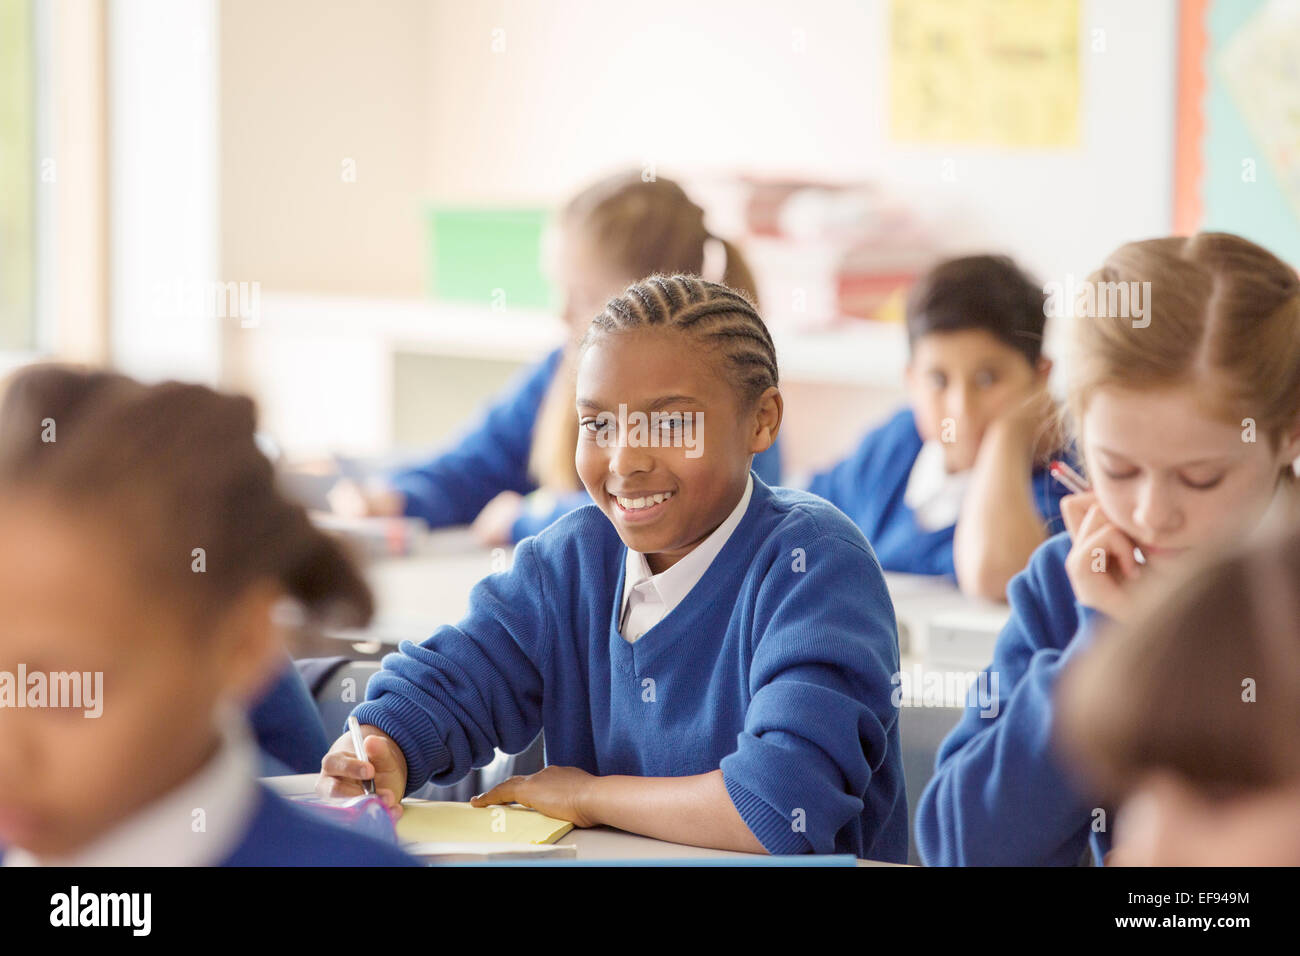 Portrait of schoolboy learning in classroom Stock Photo